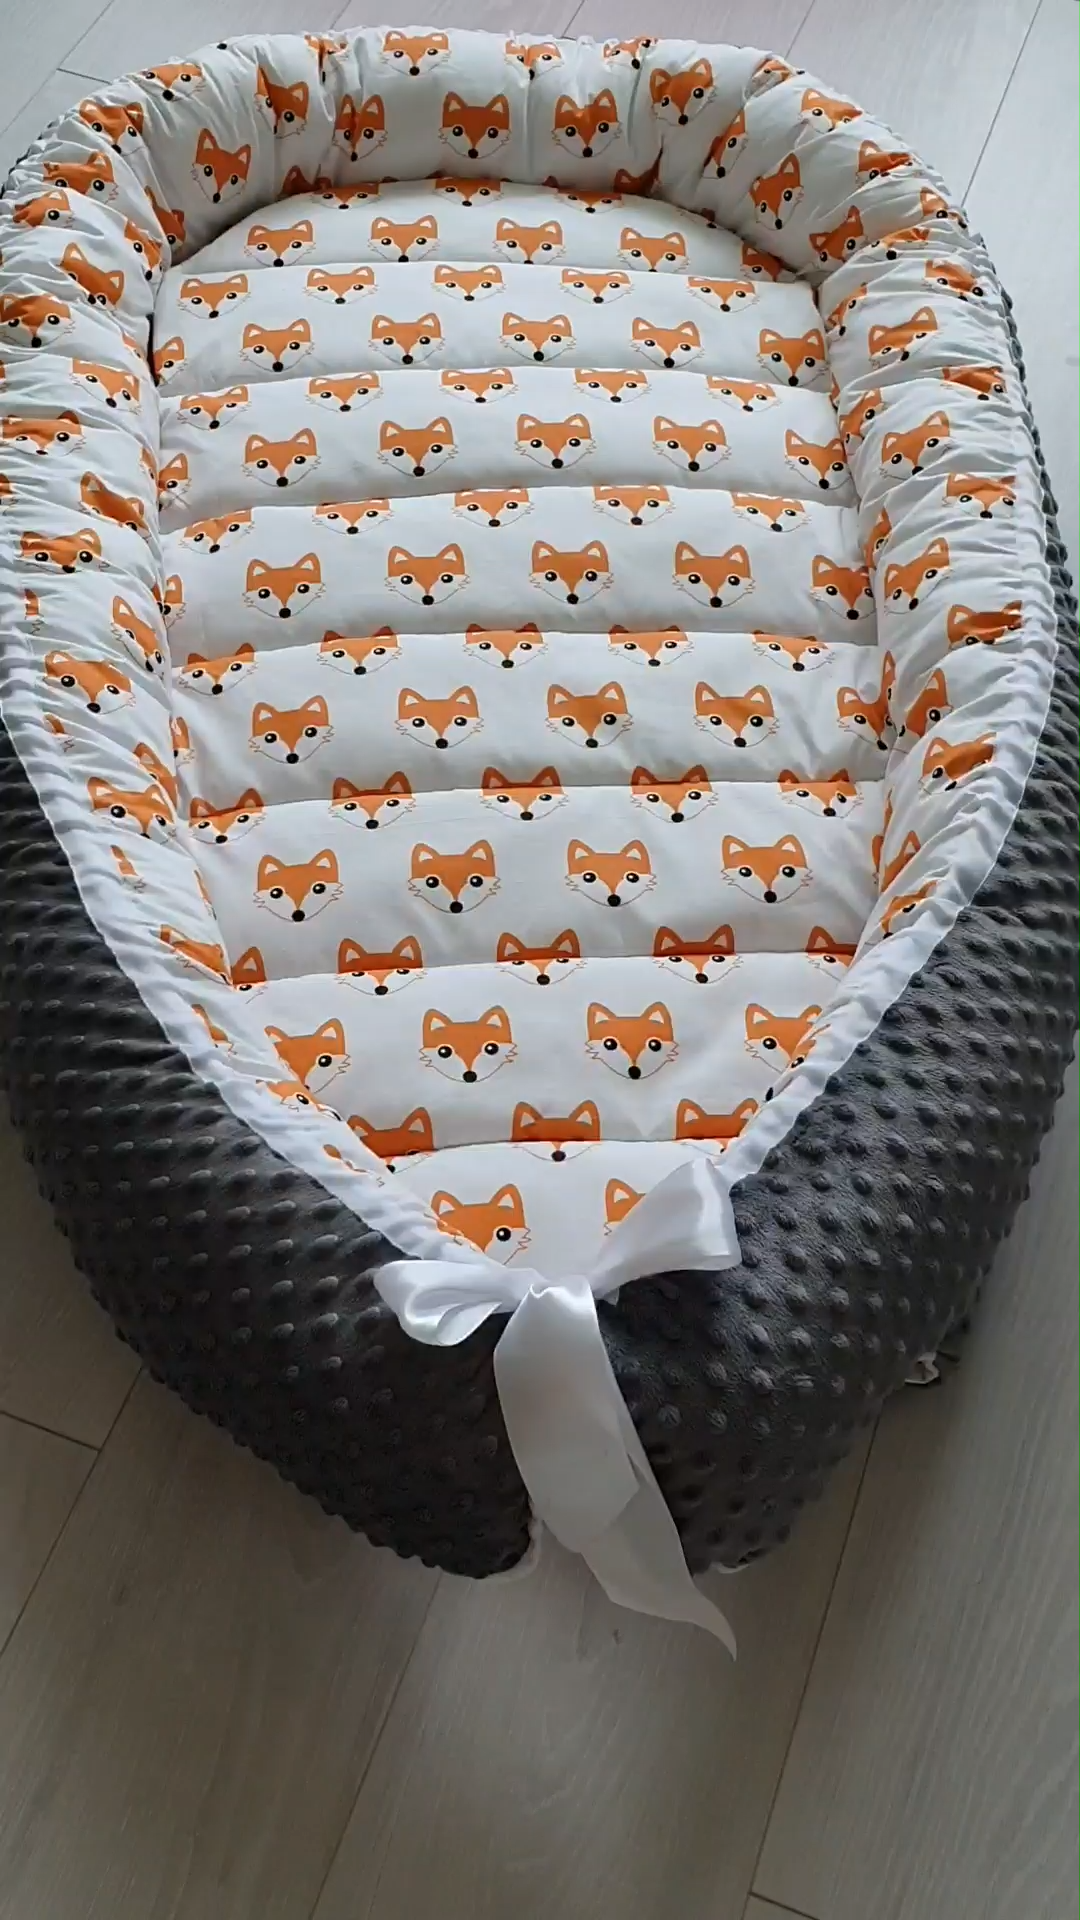 Toddler nest bed Sleeping bed Baby fox print Babynest Snuggle bed Cosleeper Travel bed Baby bedding - Toddler nest bed Sleeping bed Baby fox print Babynest Snuggle bed Cosleeper Travel bed Baby bedding -   diy Baby bed